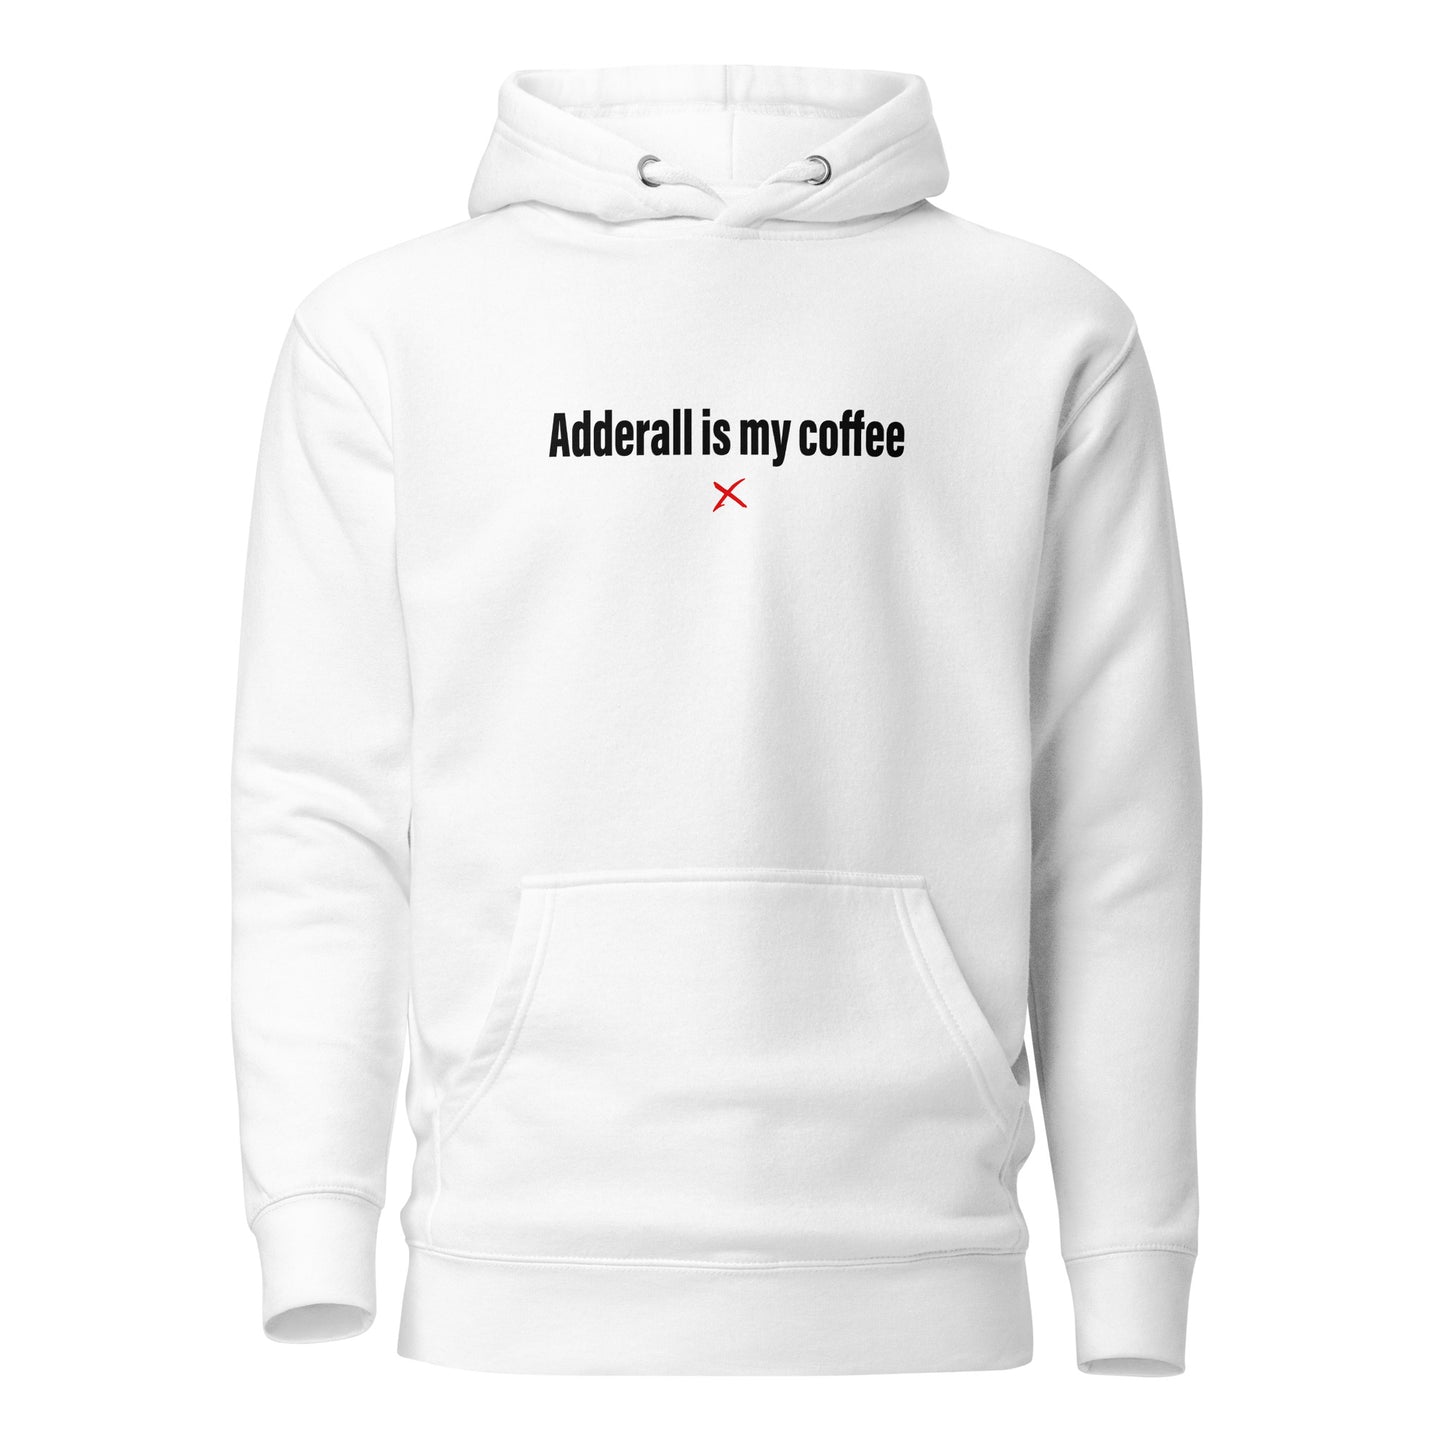 Adderall is my coffee - Hoodie